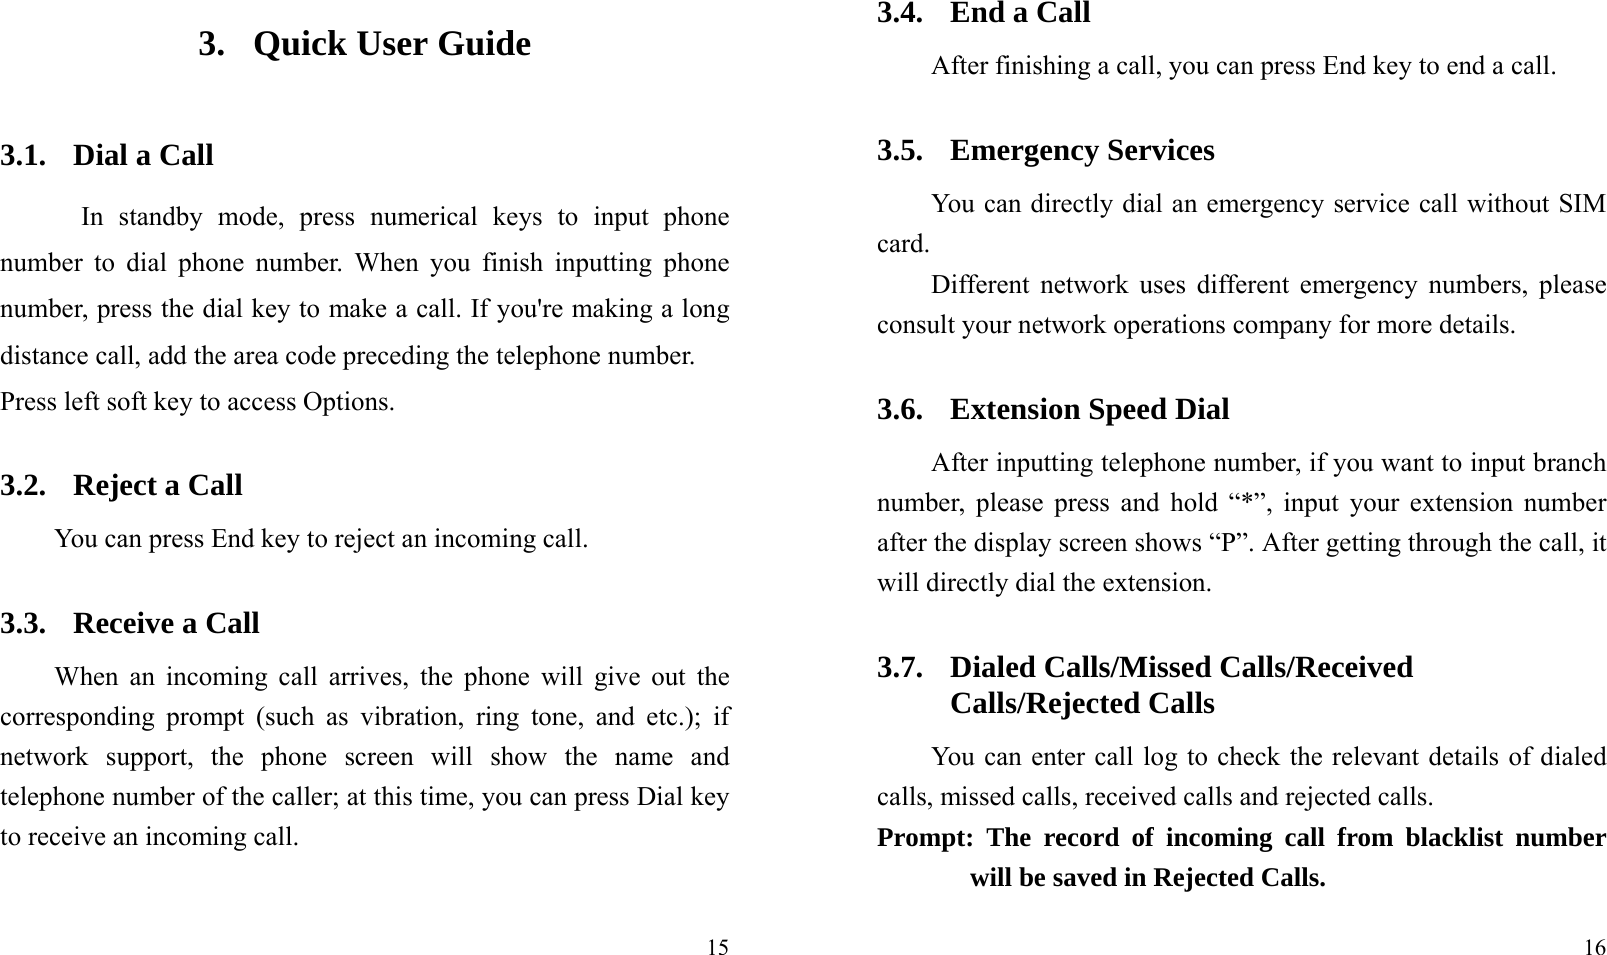  153. Quick User Guide   3.1. Dial a Call In standby mode, press numerical keys to input phone number to dial phone number. When you finish inputting phone number, press the dial key to make a call. If you&apos;re making a long distance call, add the area code preceding the telephone number. Press left soft key to access Options. 3.2. Reject a Call You can press End key to reject an incoming call.   3.3. Receive a Call When an incoming call arrives, the phone will give out the corresponding prompt (such as vibration, ring tone, and etc.); if network support, the phone screen will show the name and telephone number of the caller; at this time, you can press Dial key to receive an incoming call.    16 3.4. End a Call After finishing a call, you can press End key to end a call.     3.5. Emergency Services You can directly dial an emergency service call without SIM card.  Different network uses different emergency numbers, please consult your network operations company for more details.     3.6. Extension Speed Dial   After inputting telephone number, if you want to input branch number, please press and hold “*”, input your extension number after the display screen shows “P”. After getting through the call, it will directly dial the extension.   3.7. Dialed Calls/Missed Calls/Received Calls/Rejected Calls You can enter call log to check the relevant details of dialed calls, missed calls, received calls and rejected calls.   Prompt: The record of incoming call from blacklist number will be saved in Rejected Calls.   